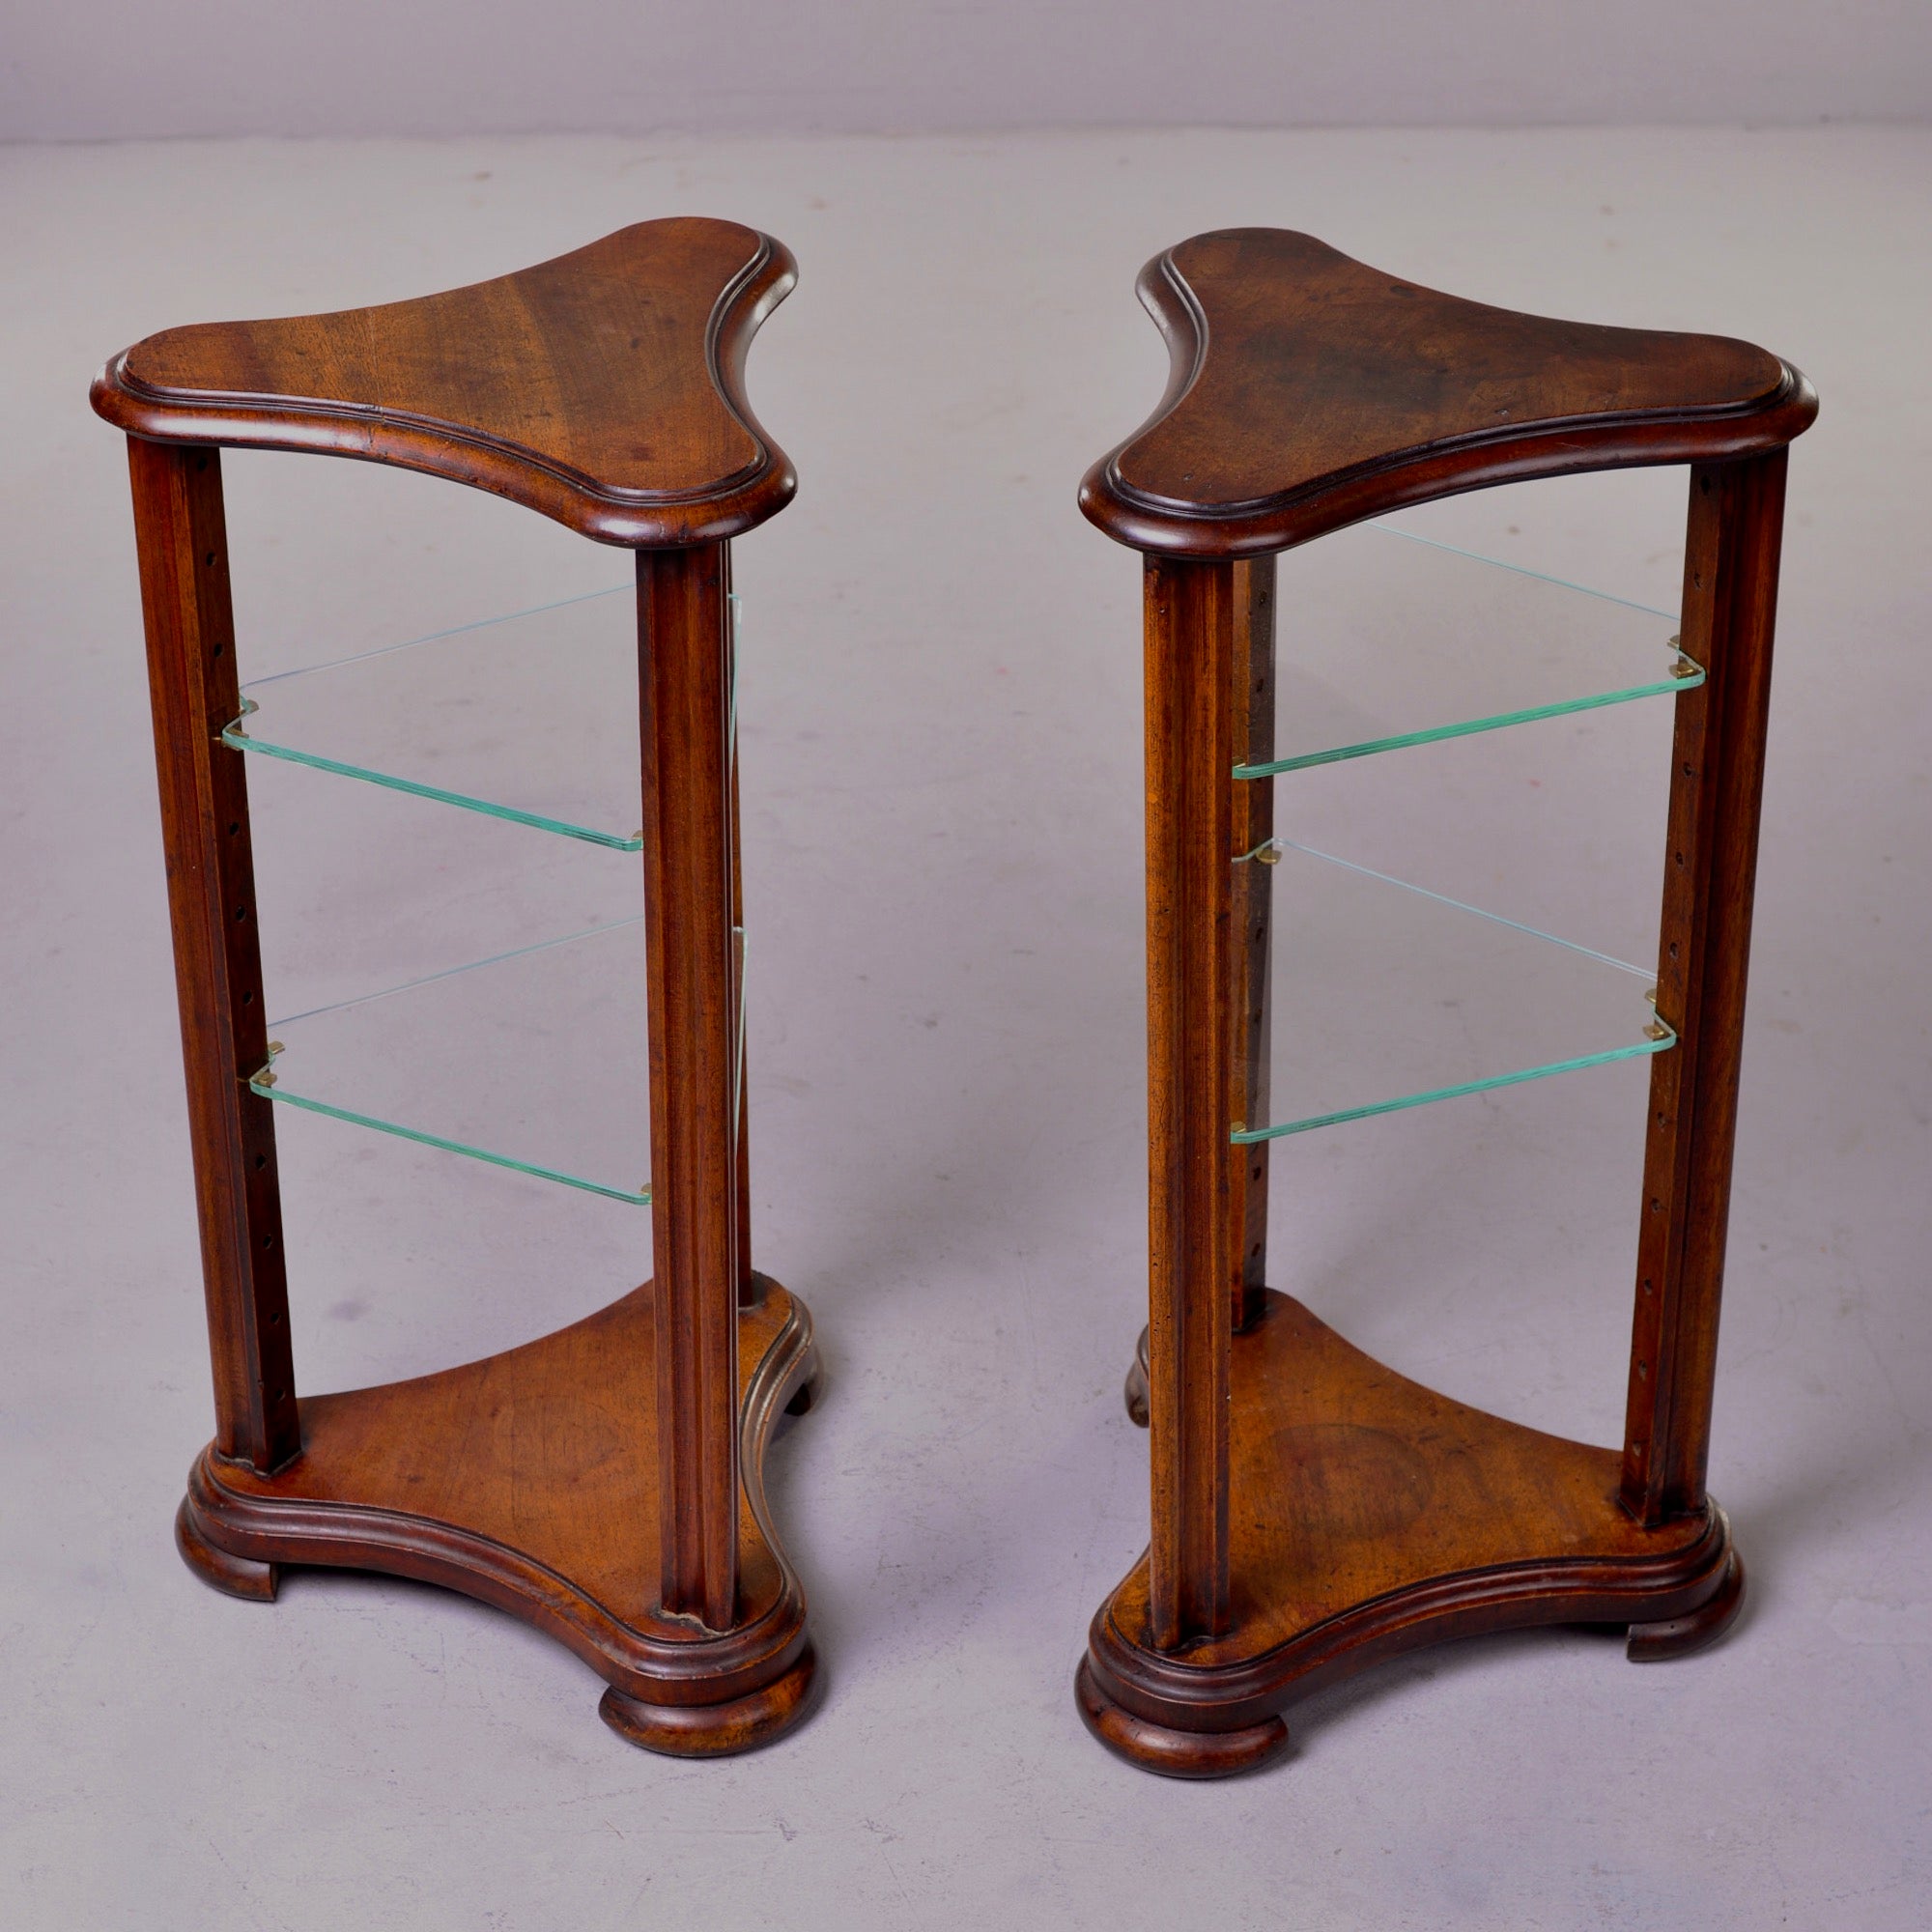 Pair of Unusual Walnut Stands with Glass Shelves